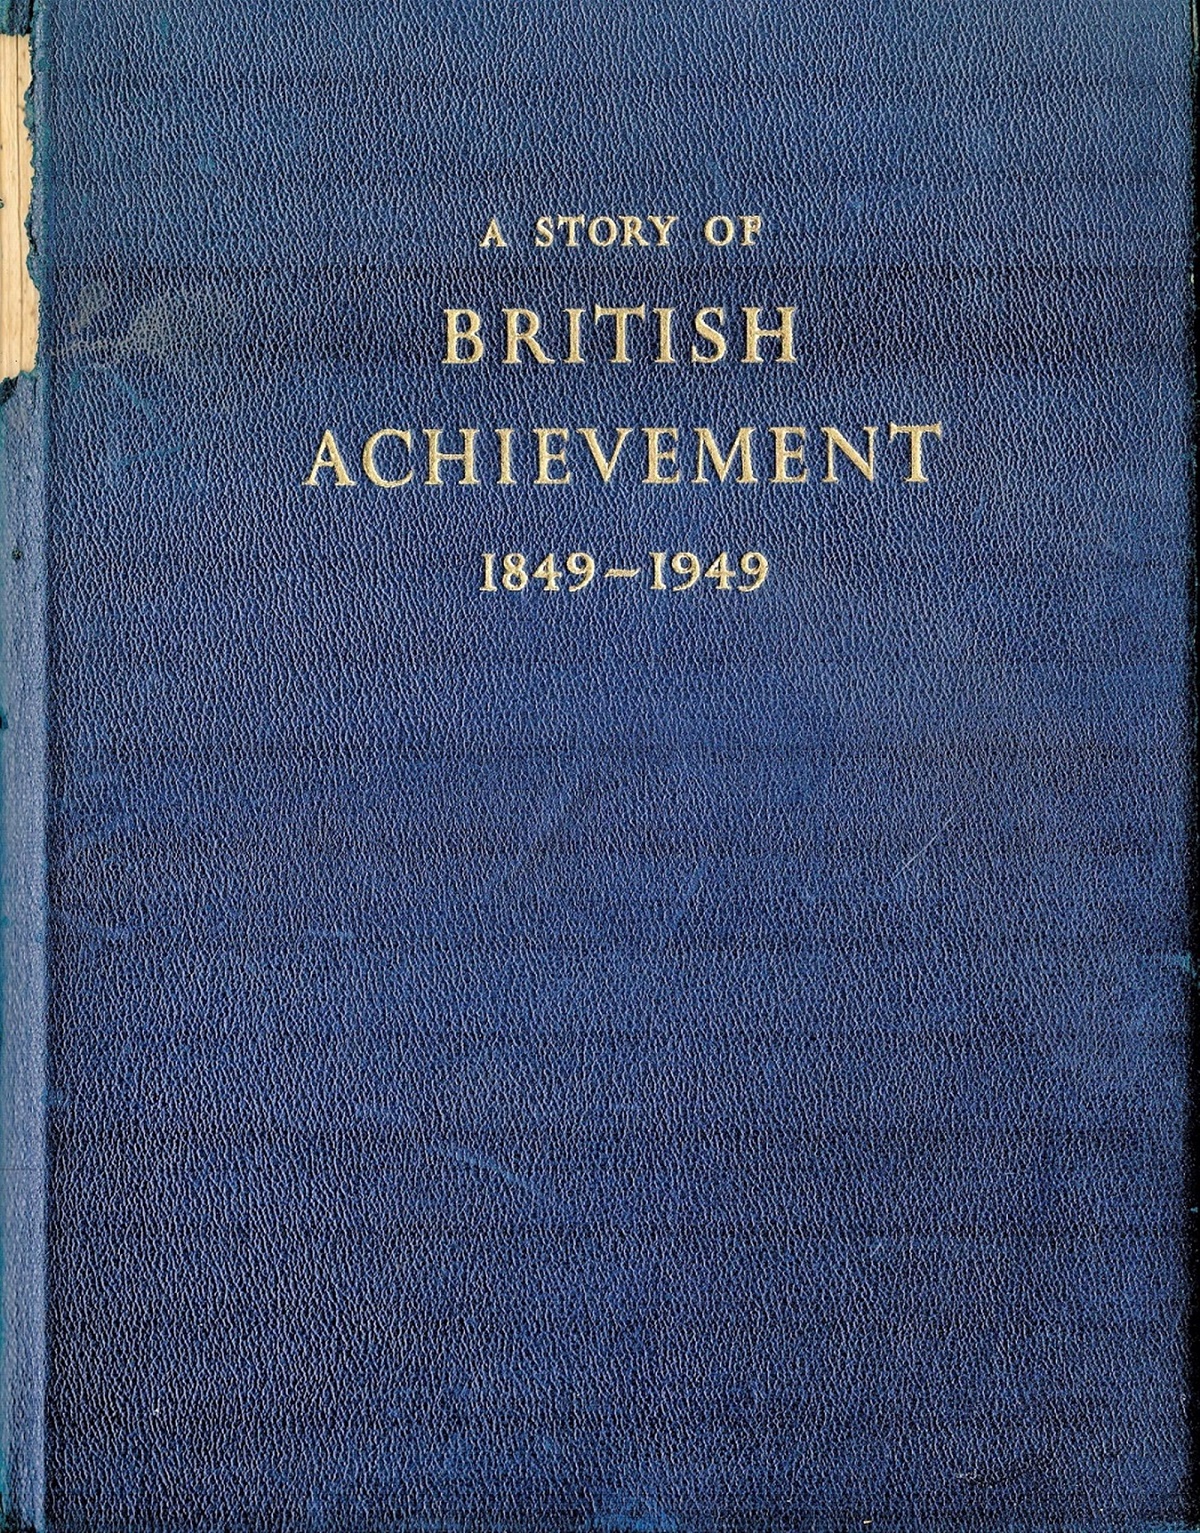 A Story of British Achievement 1849 1949 Hardback Book date and edition unknown publisher unknown - Image 2 of 4